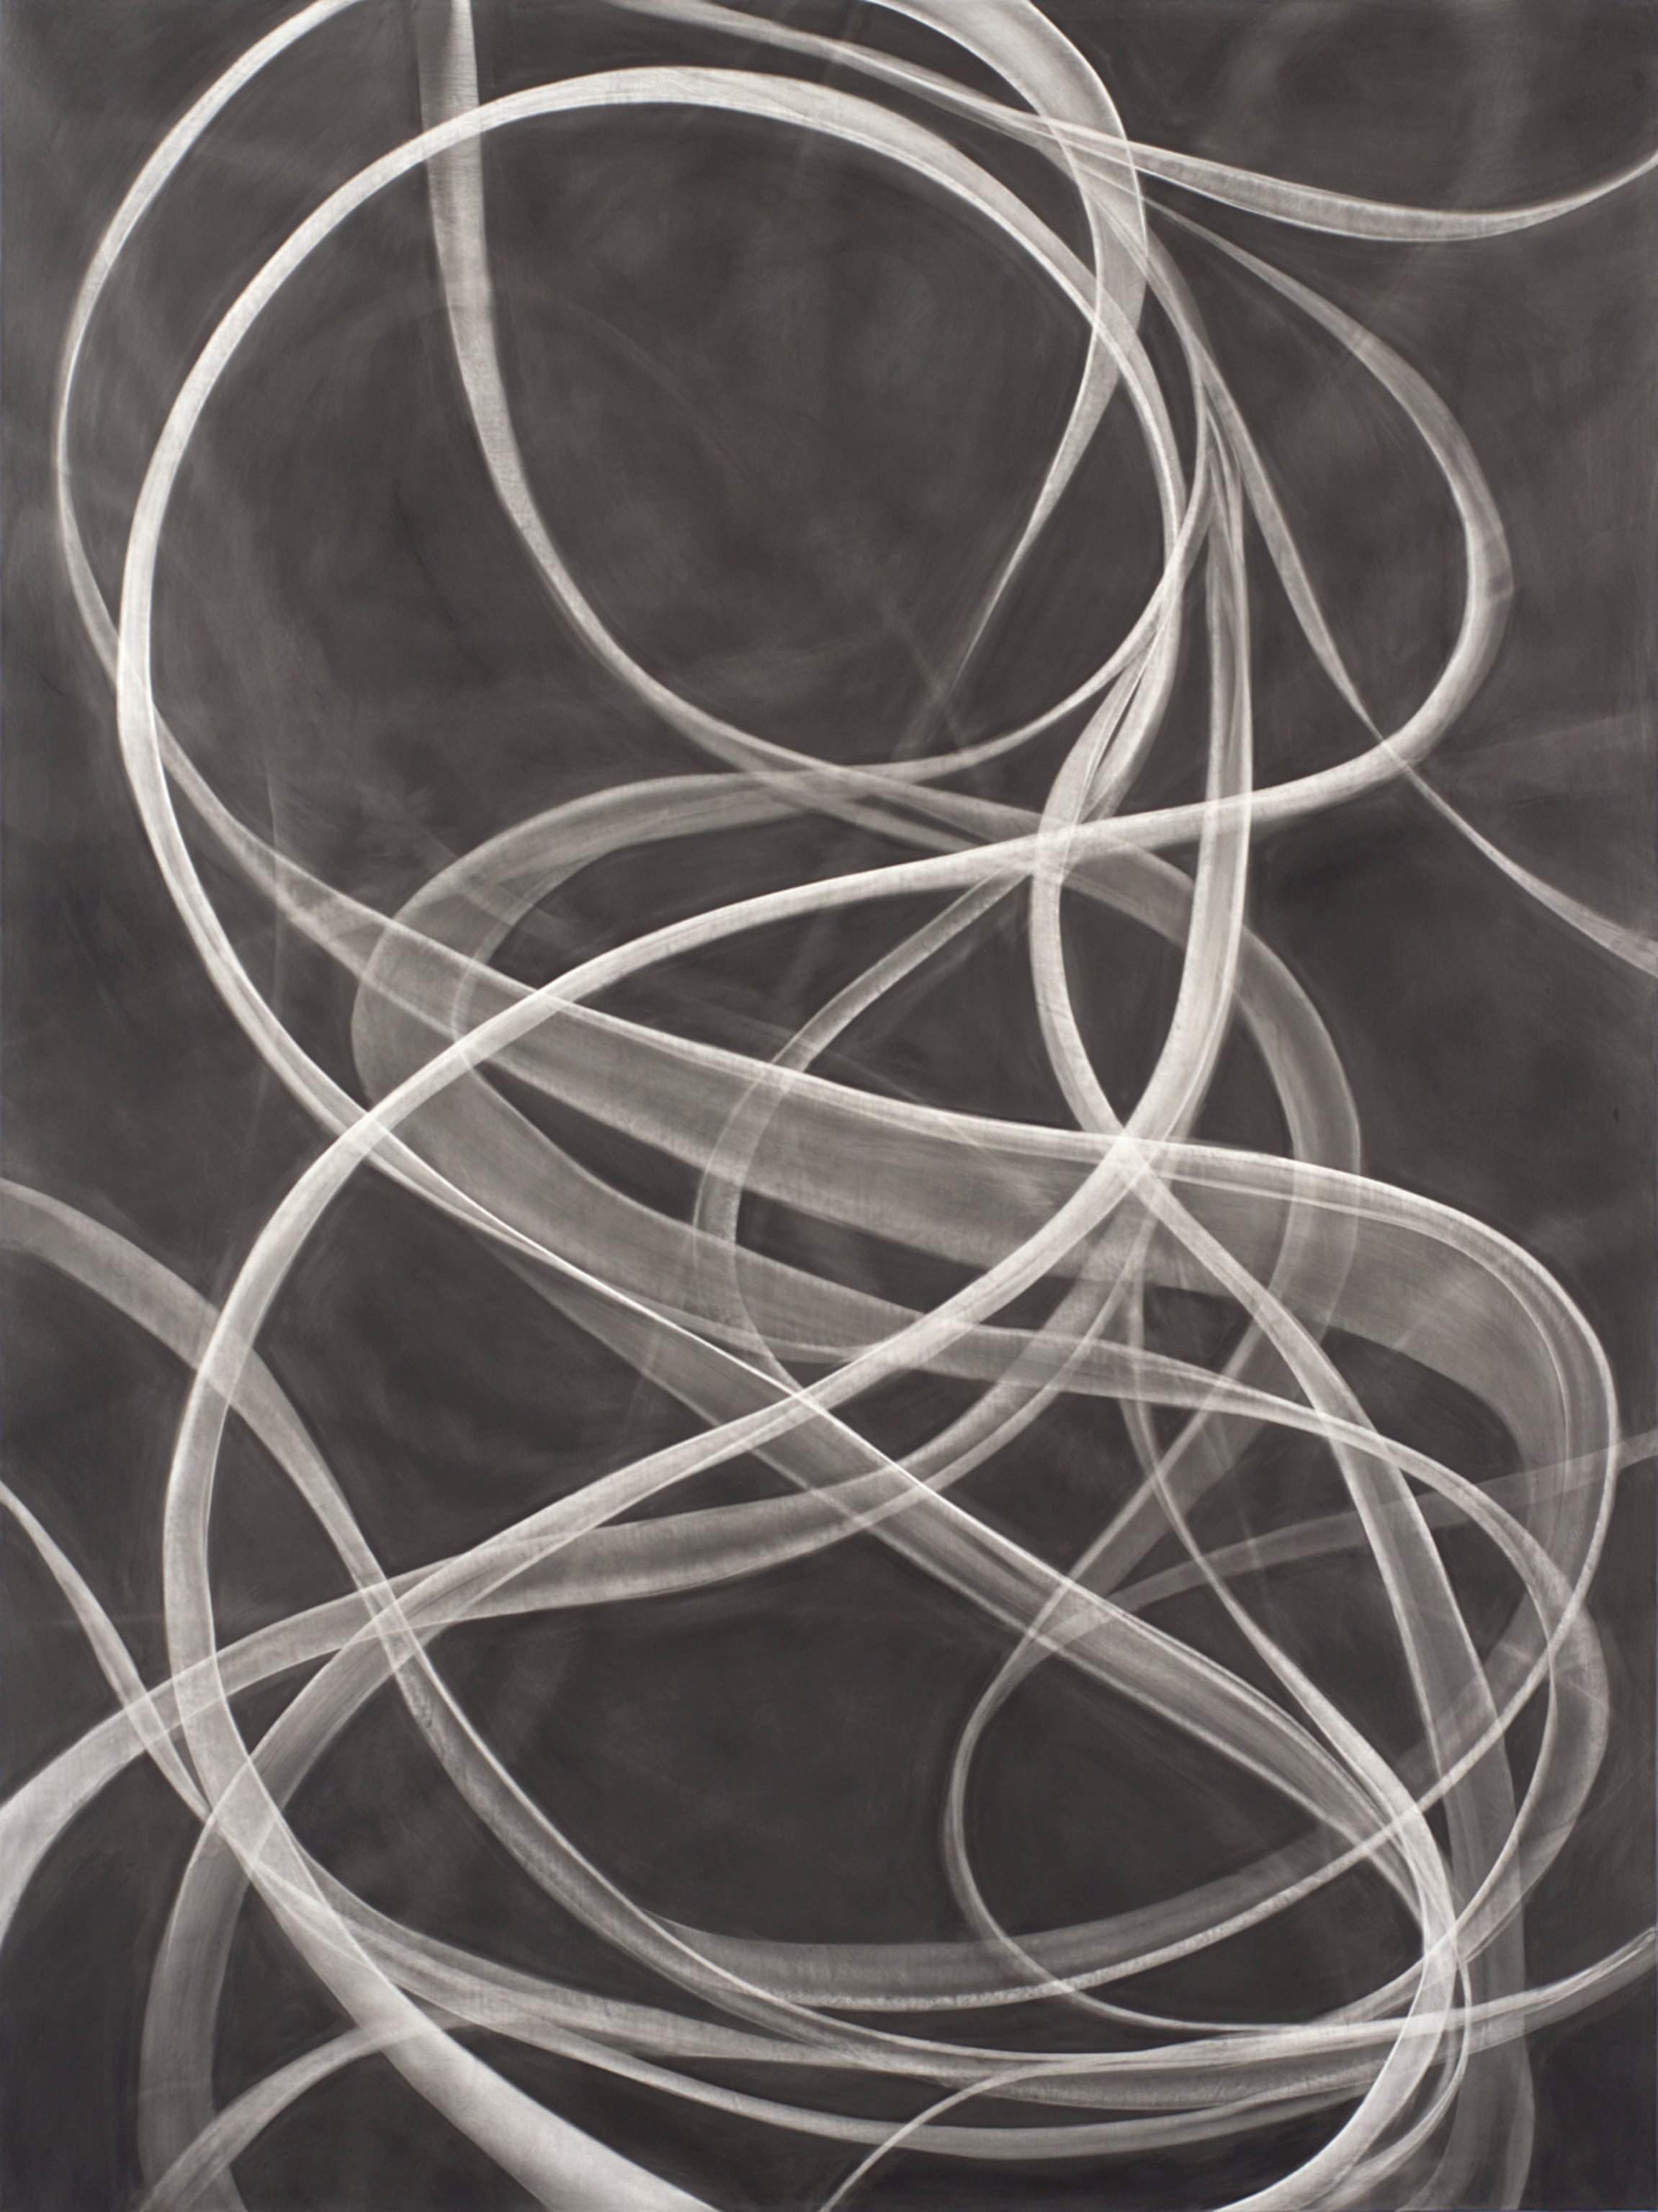 Albee, 73 x 55 inches, 42 x 76, oil, alkyd and graphite on linen, 2014